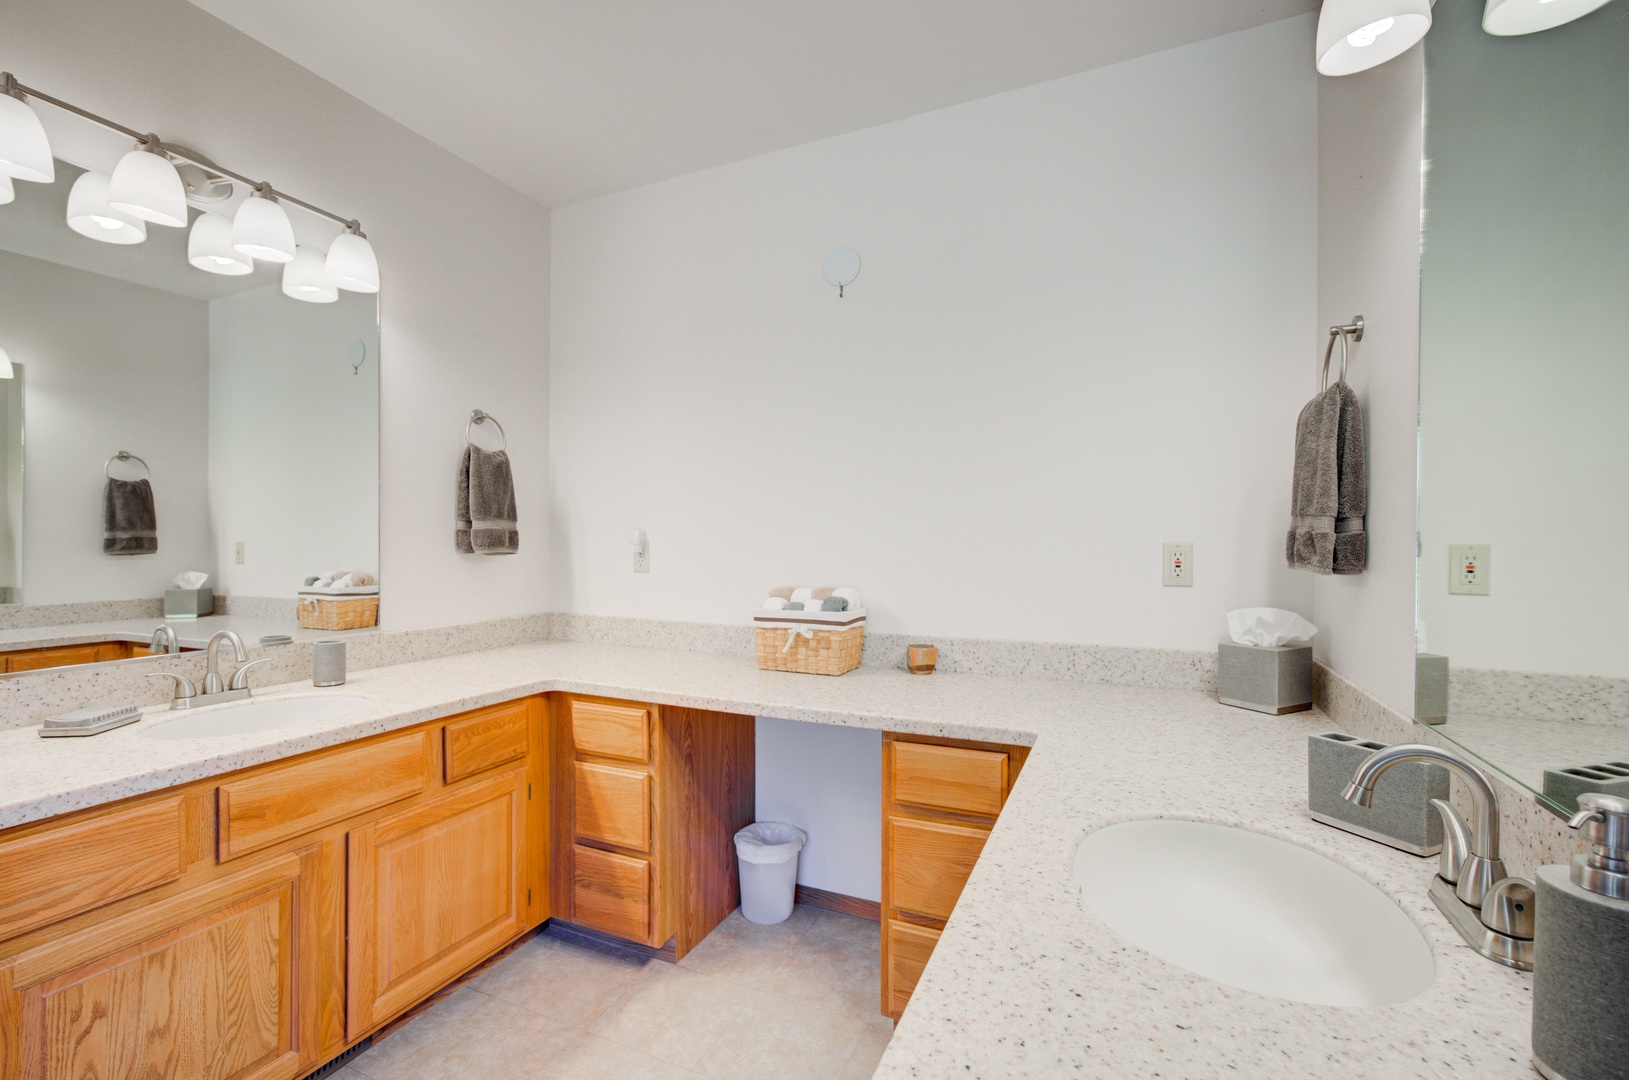 Bozeman Vacation Rentals, The Canyon Lookout - Attached large primary bathroom